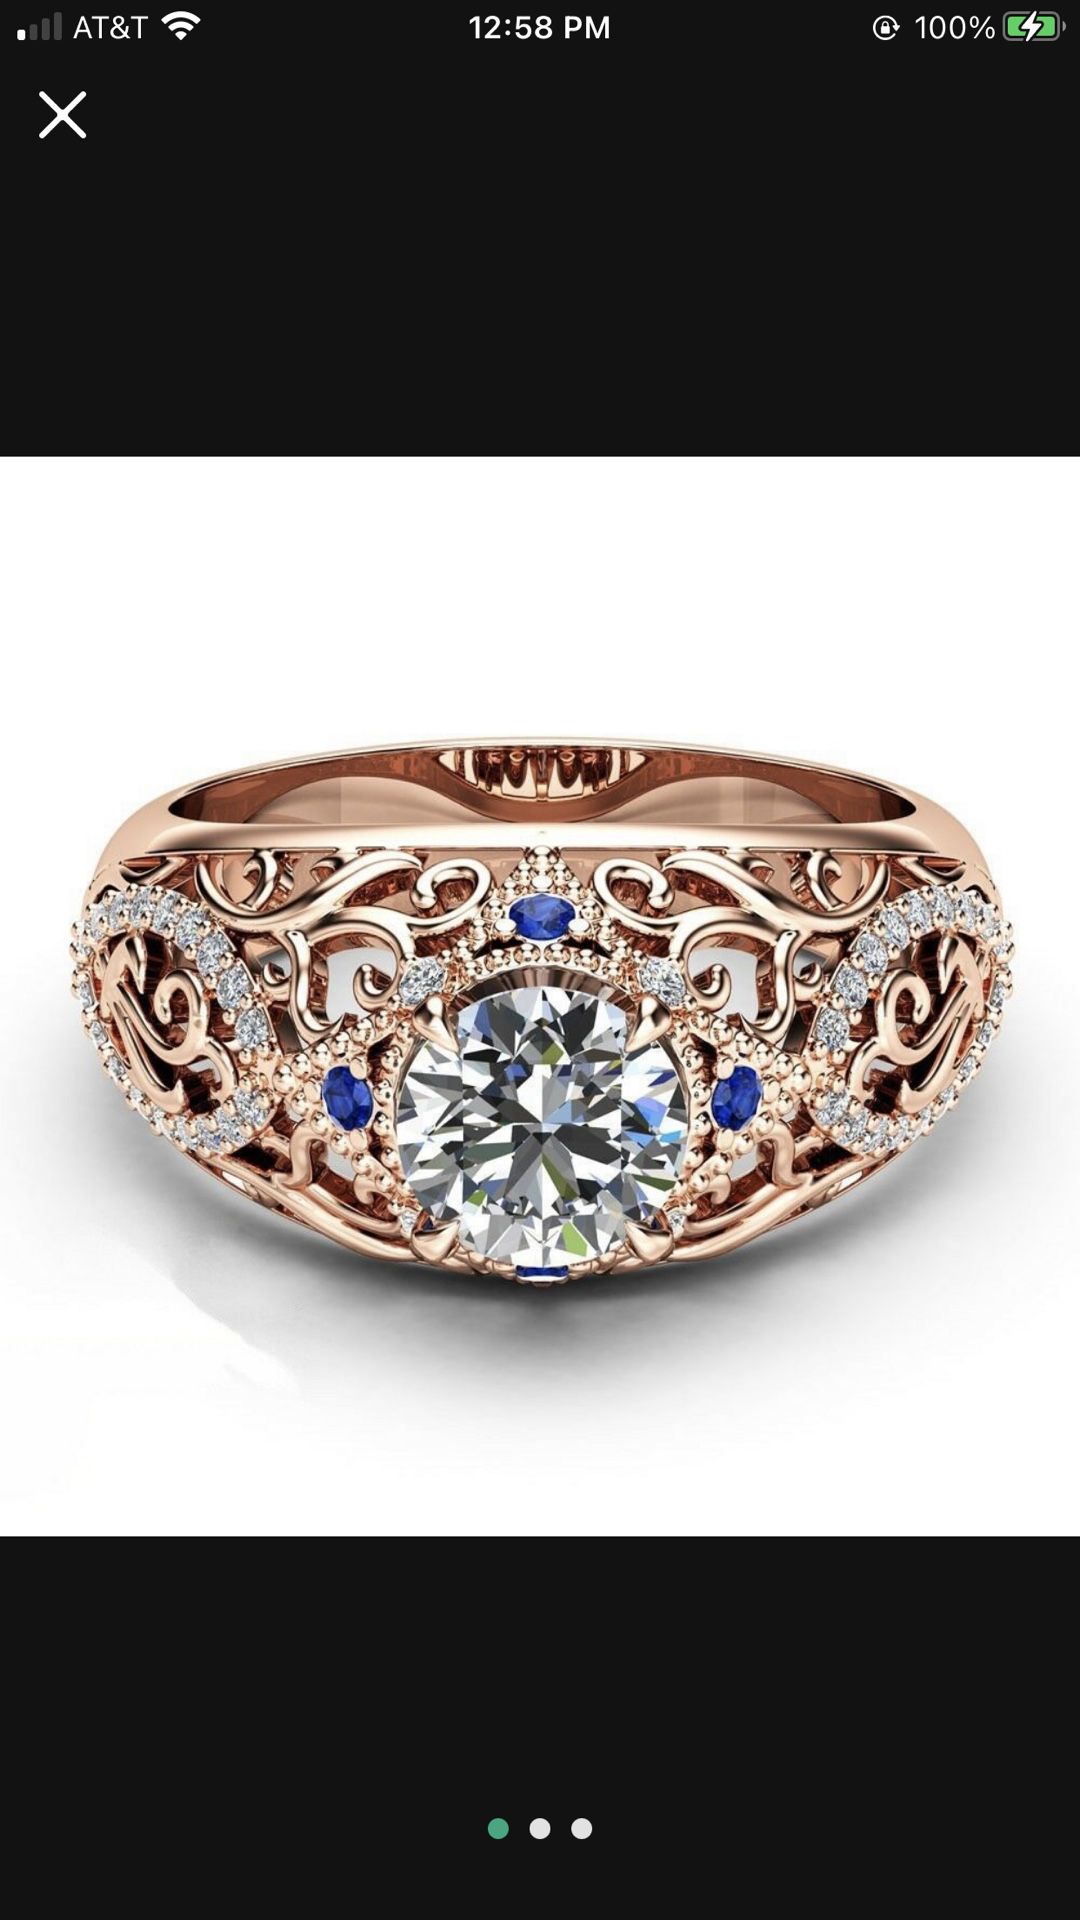 SALE* Beautiful Rose Gold Created White Sapphire Ring Sizes 6/7/8/9/10 *See My Other Items*